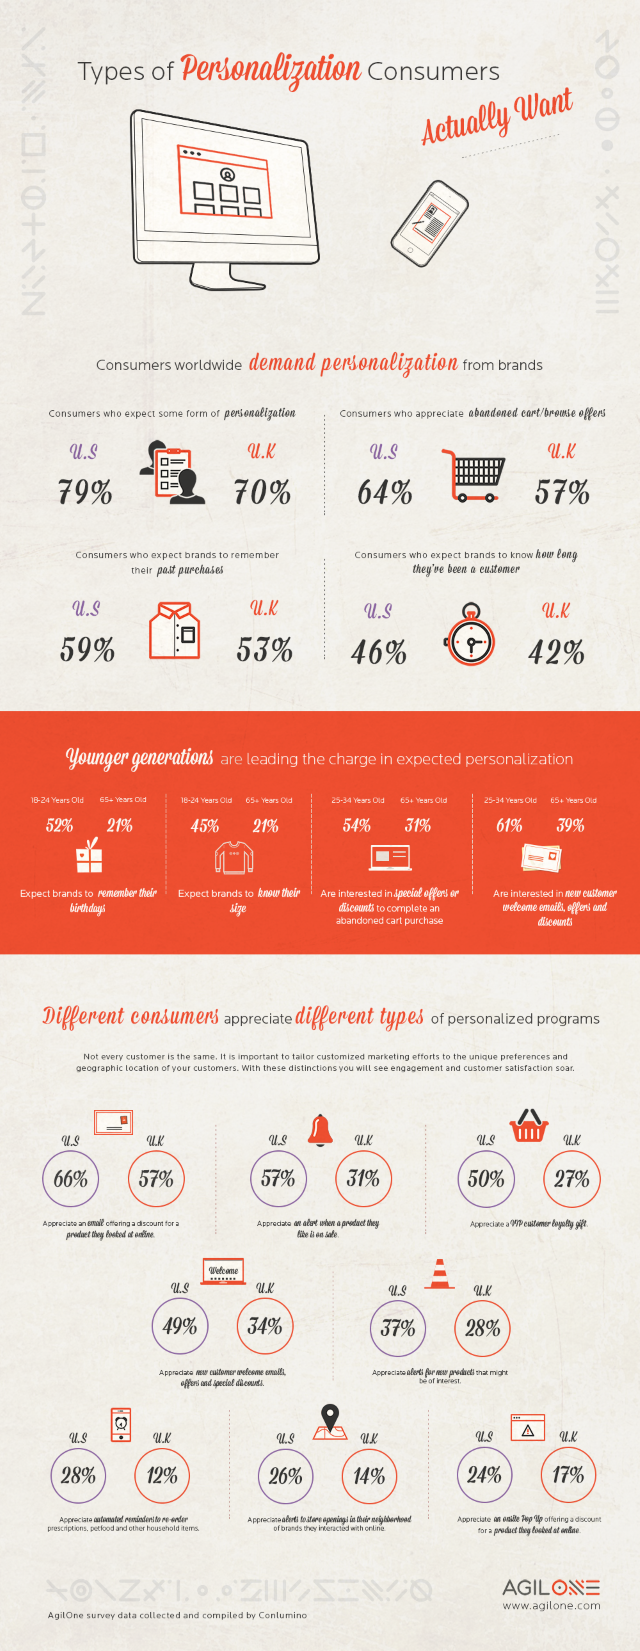 AgilOne_Types of Personalization Infographic640